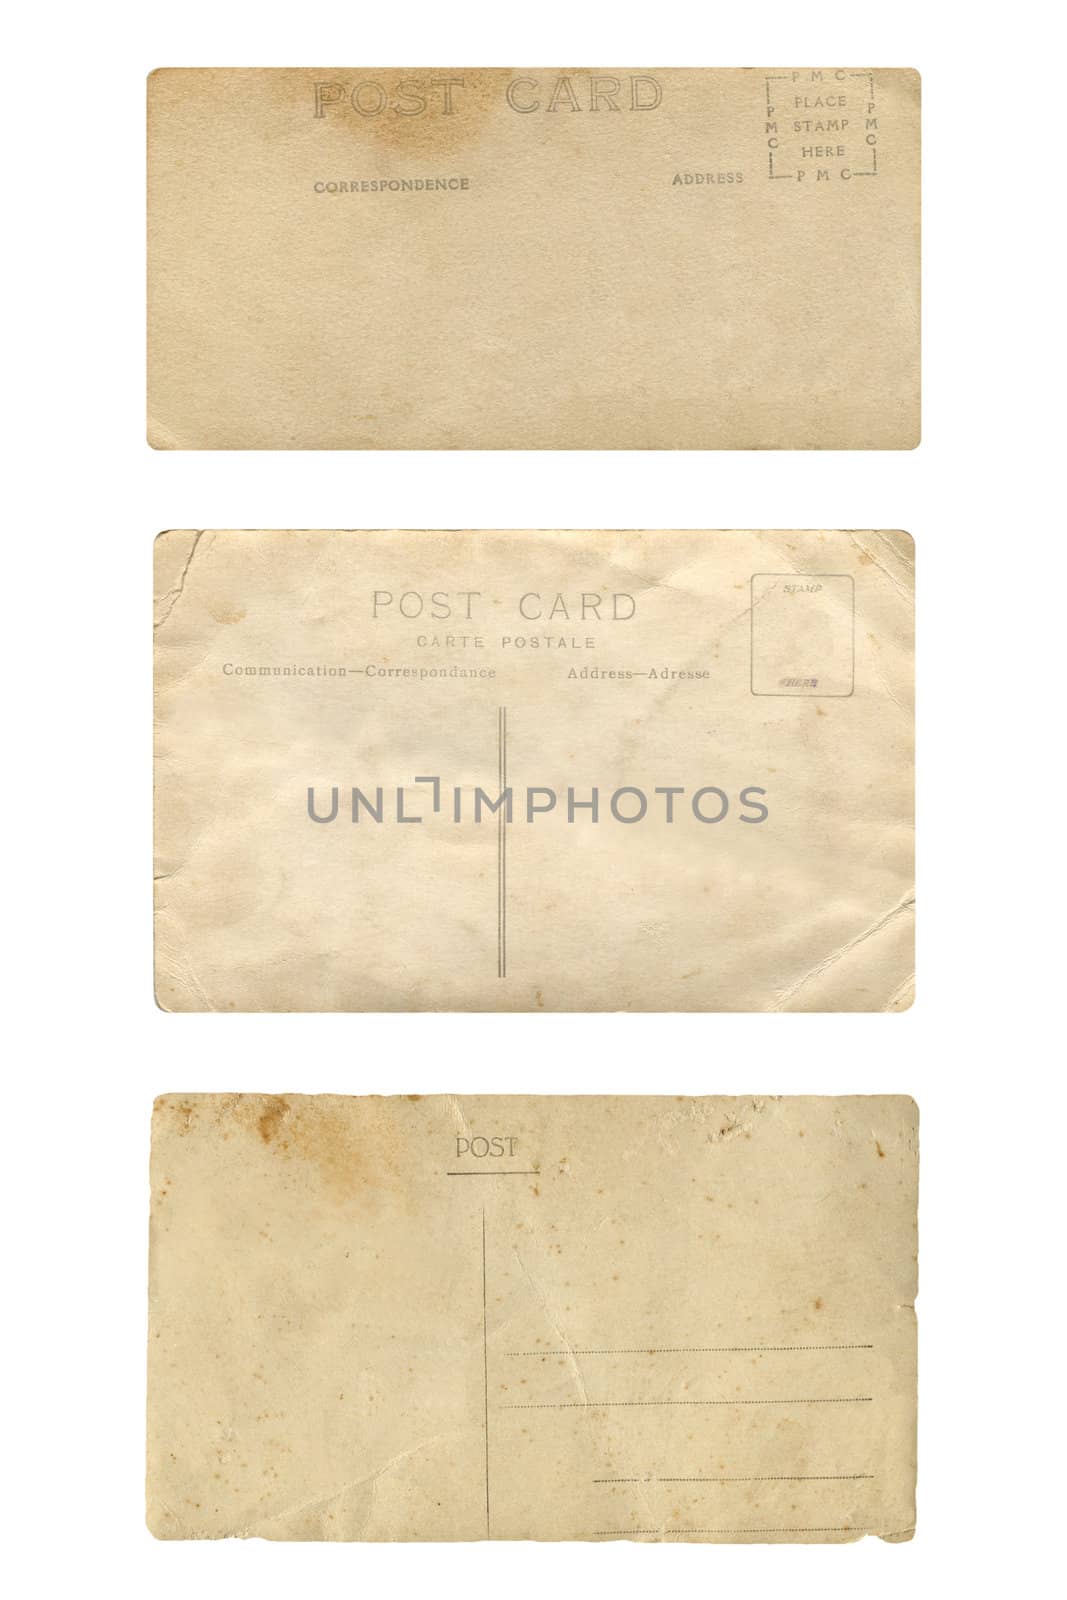 A blank postcard useful as a background - isolated over white background